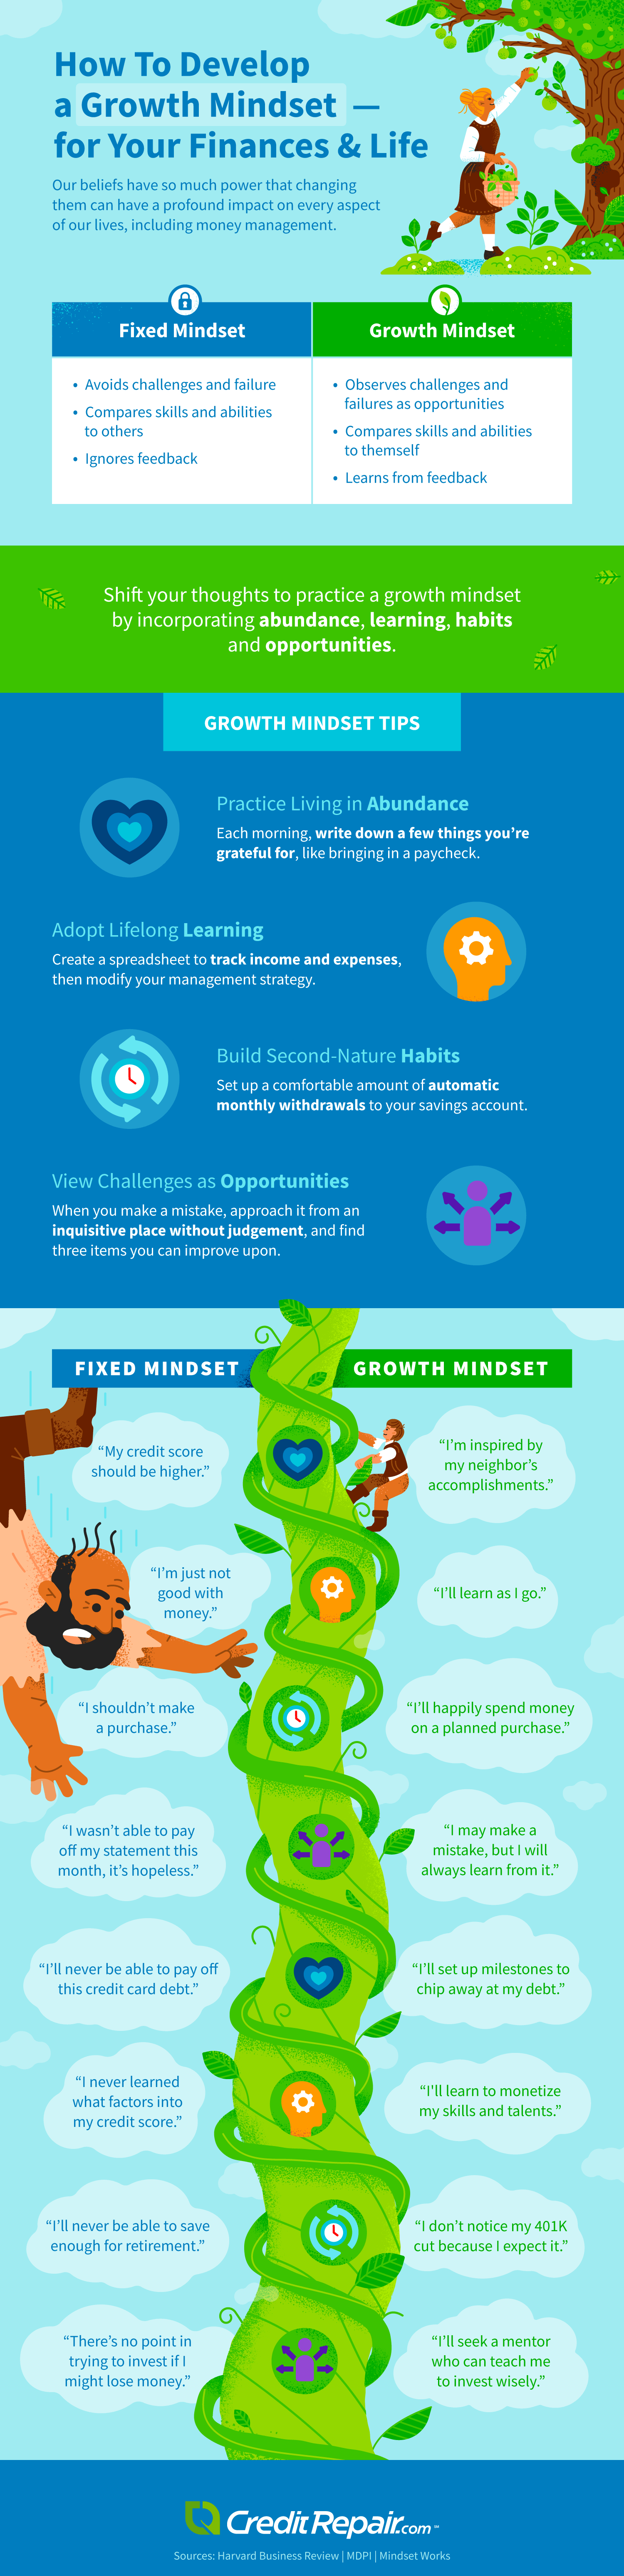 Growth mindset infographic
